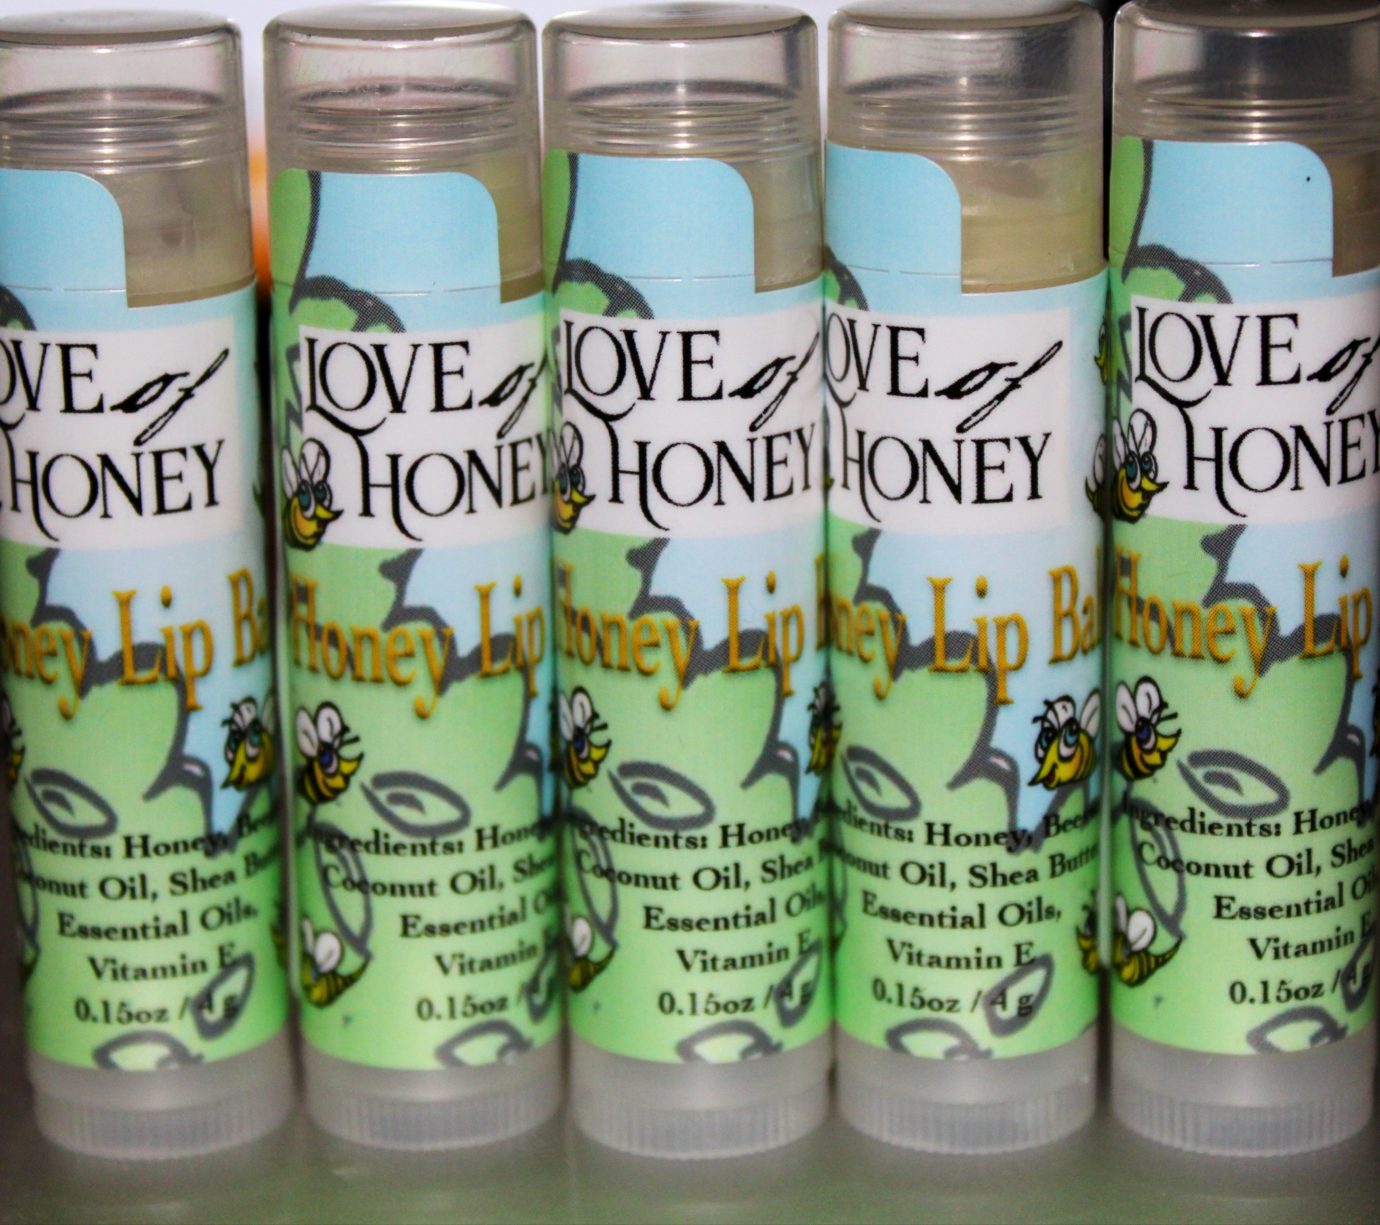 You are currently viewing Love of Honey Lip Balm now in the store